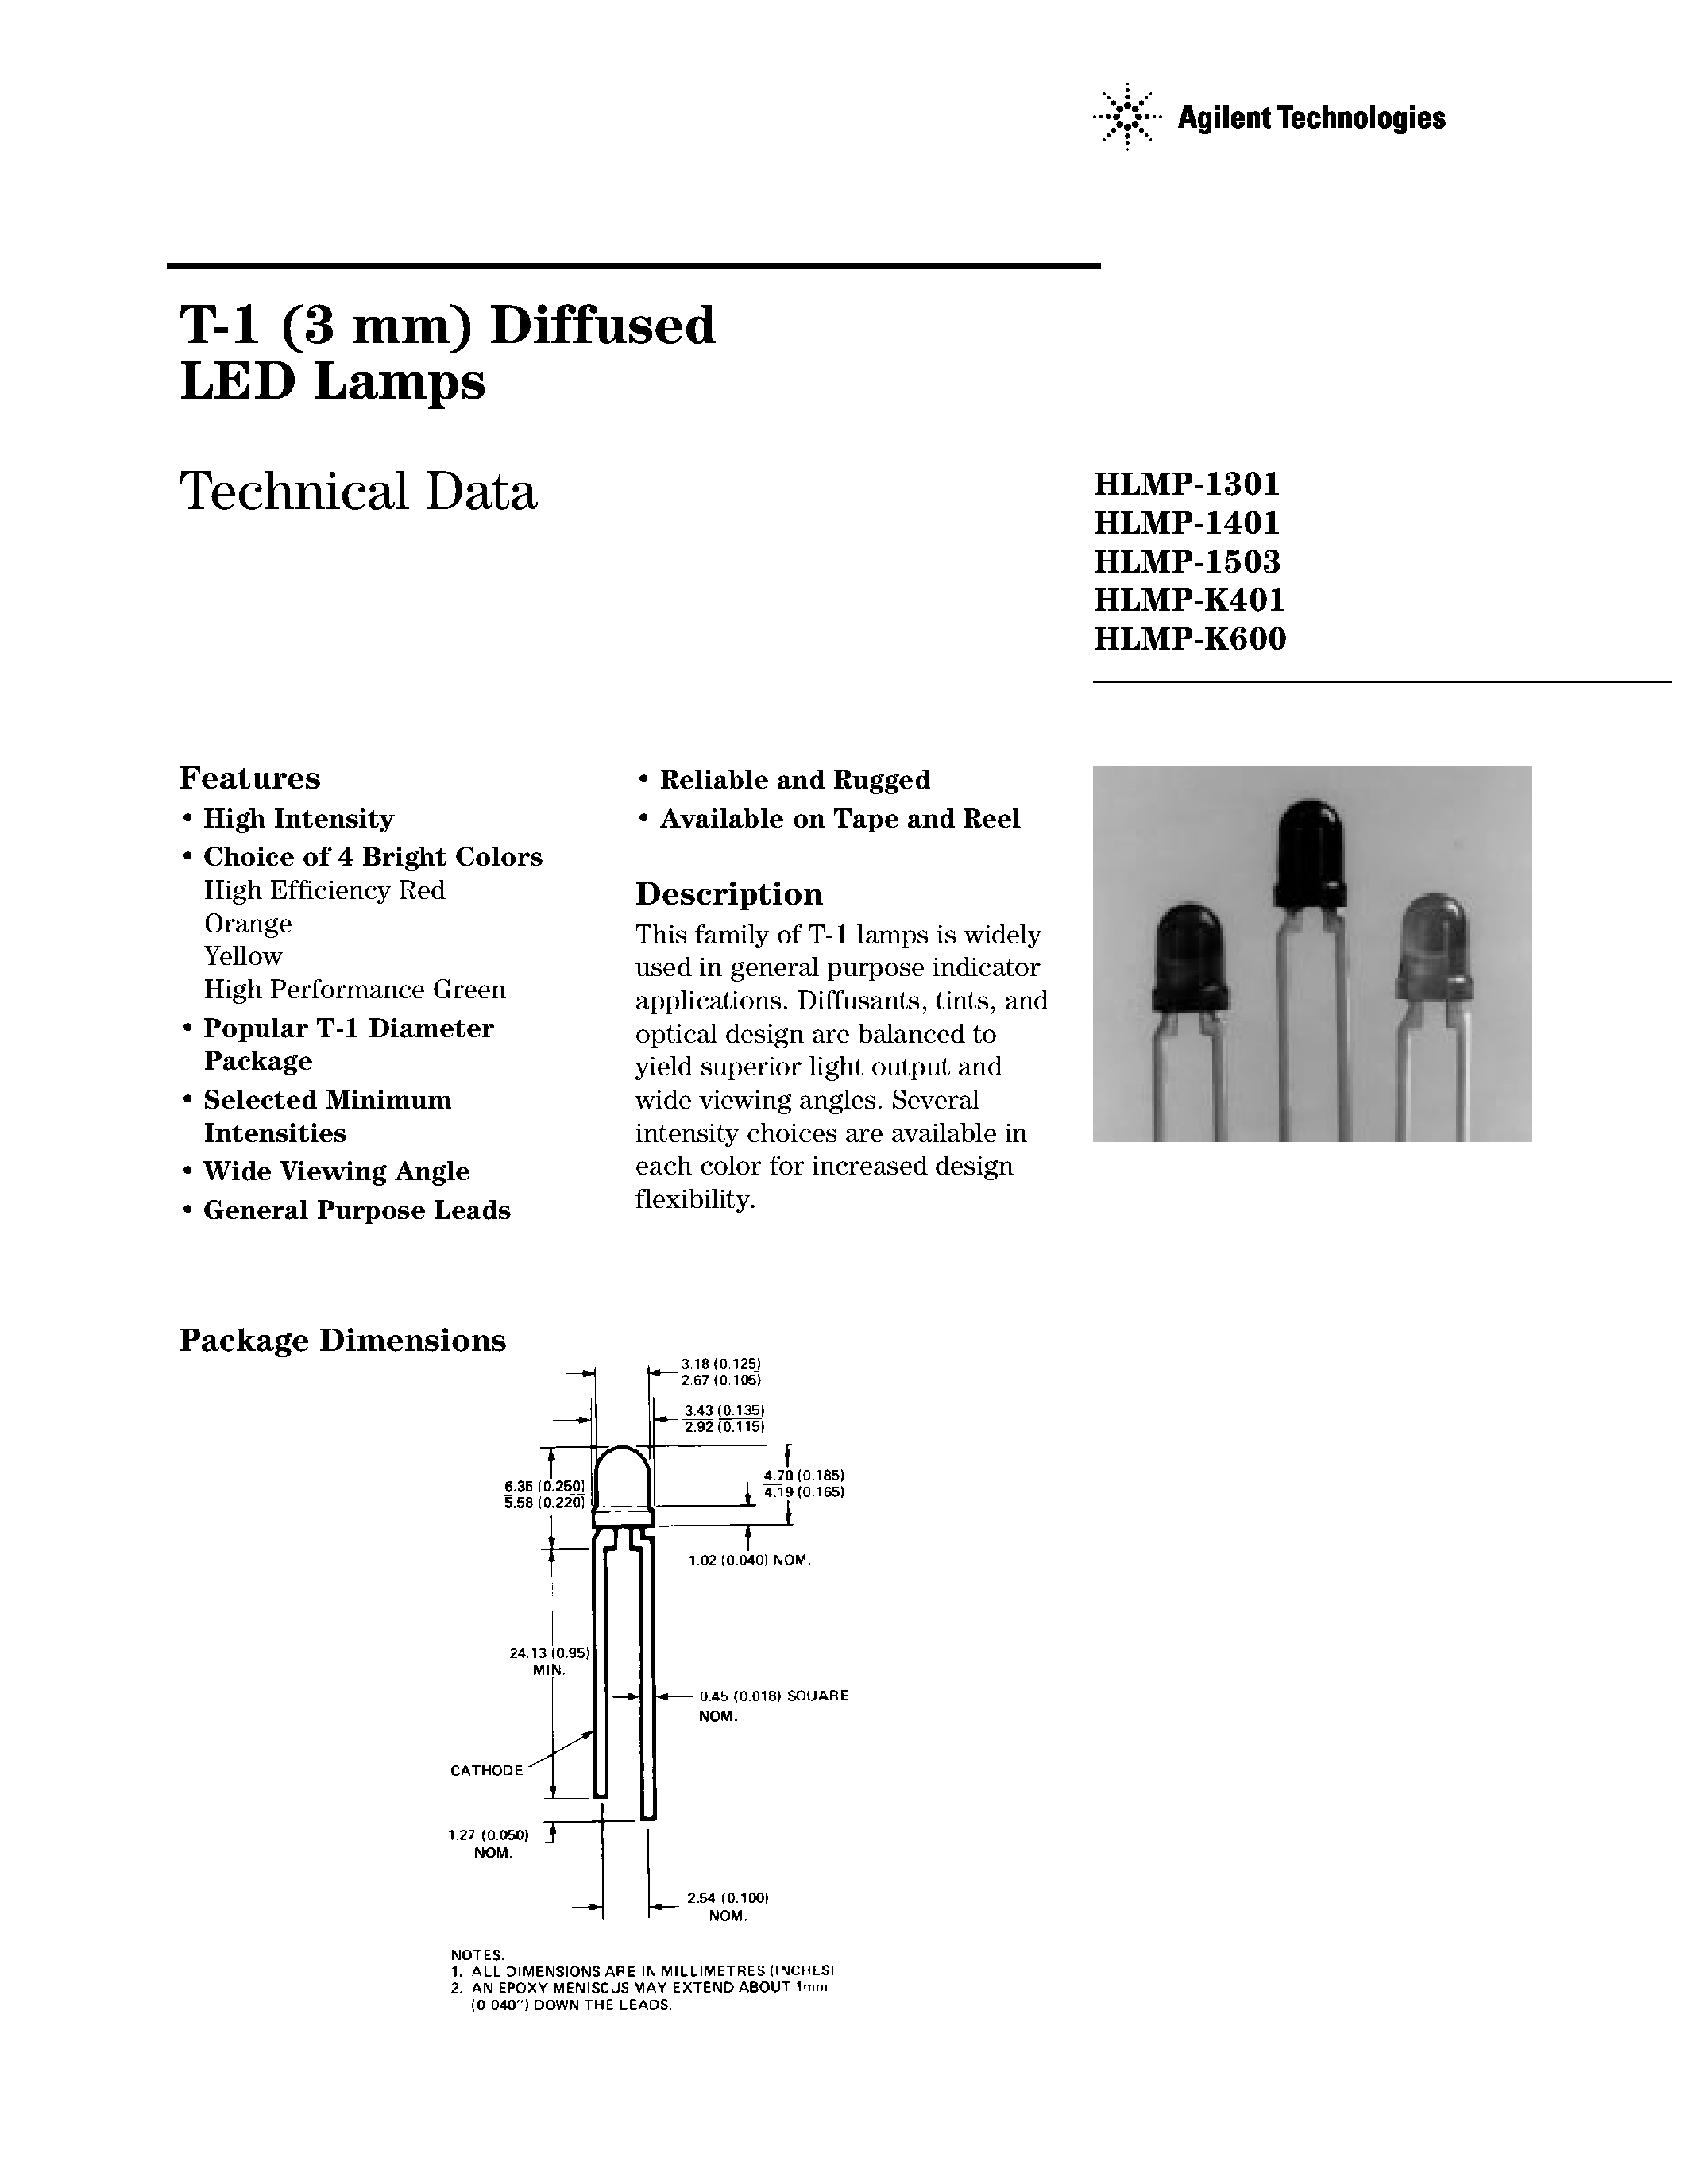 Datasheet HLMP1301 - T-1 Diffused LED Lamps page 1